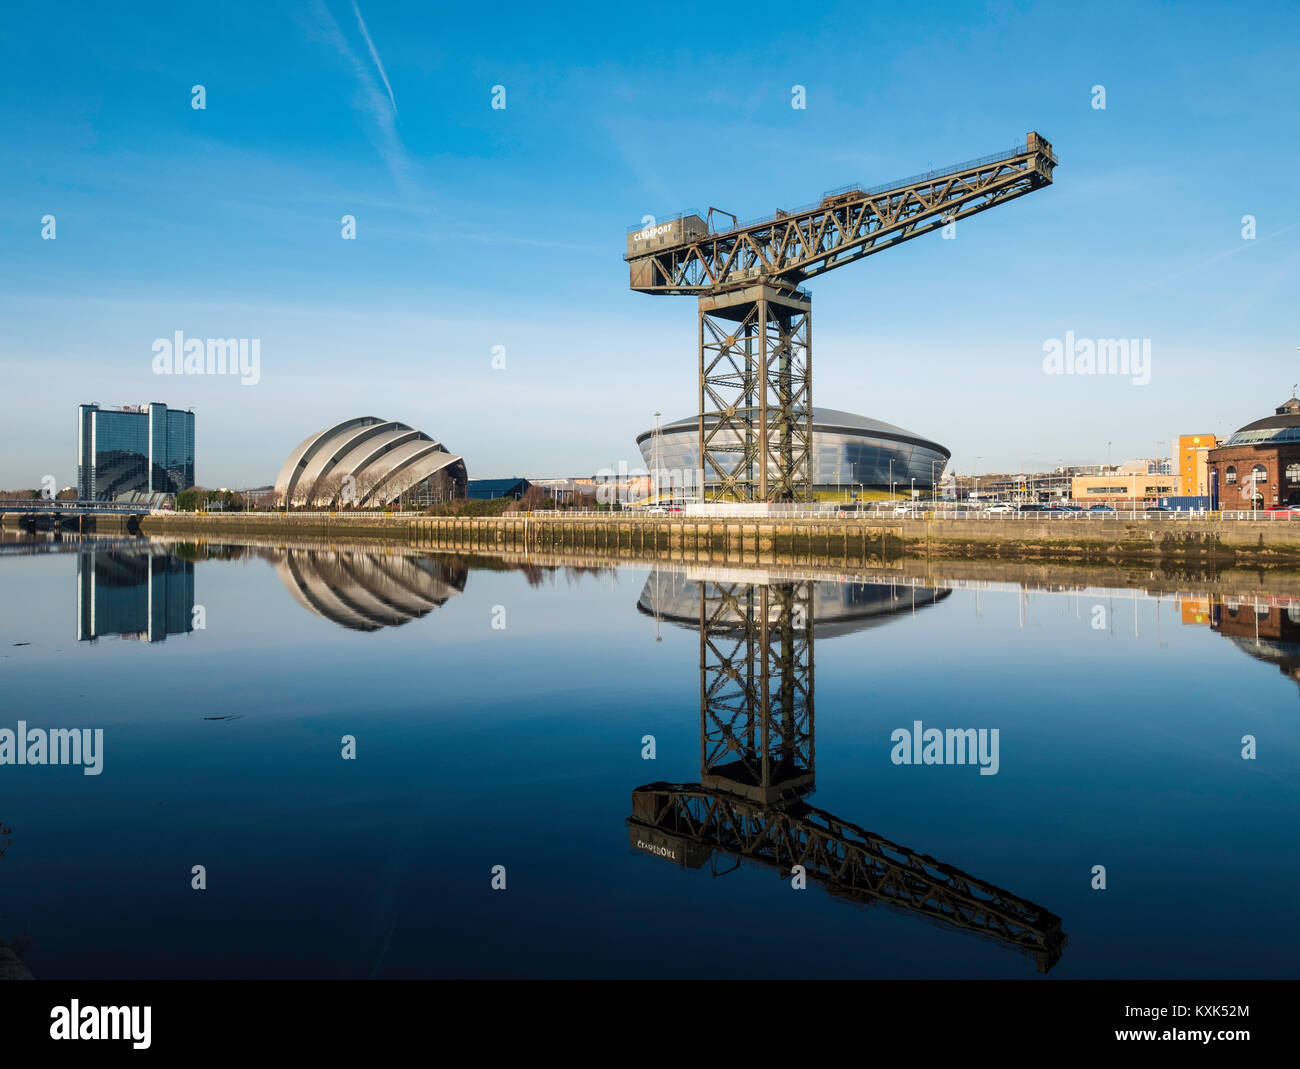 View of Finnieston Crane, SEC Armadillo and SEE Hydro arena beside River Clyde on blue sky winter day, Scotland, United Kingdom Stock Photo